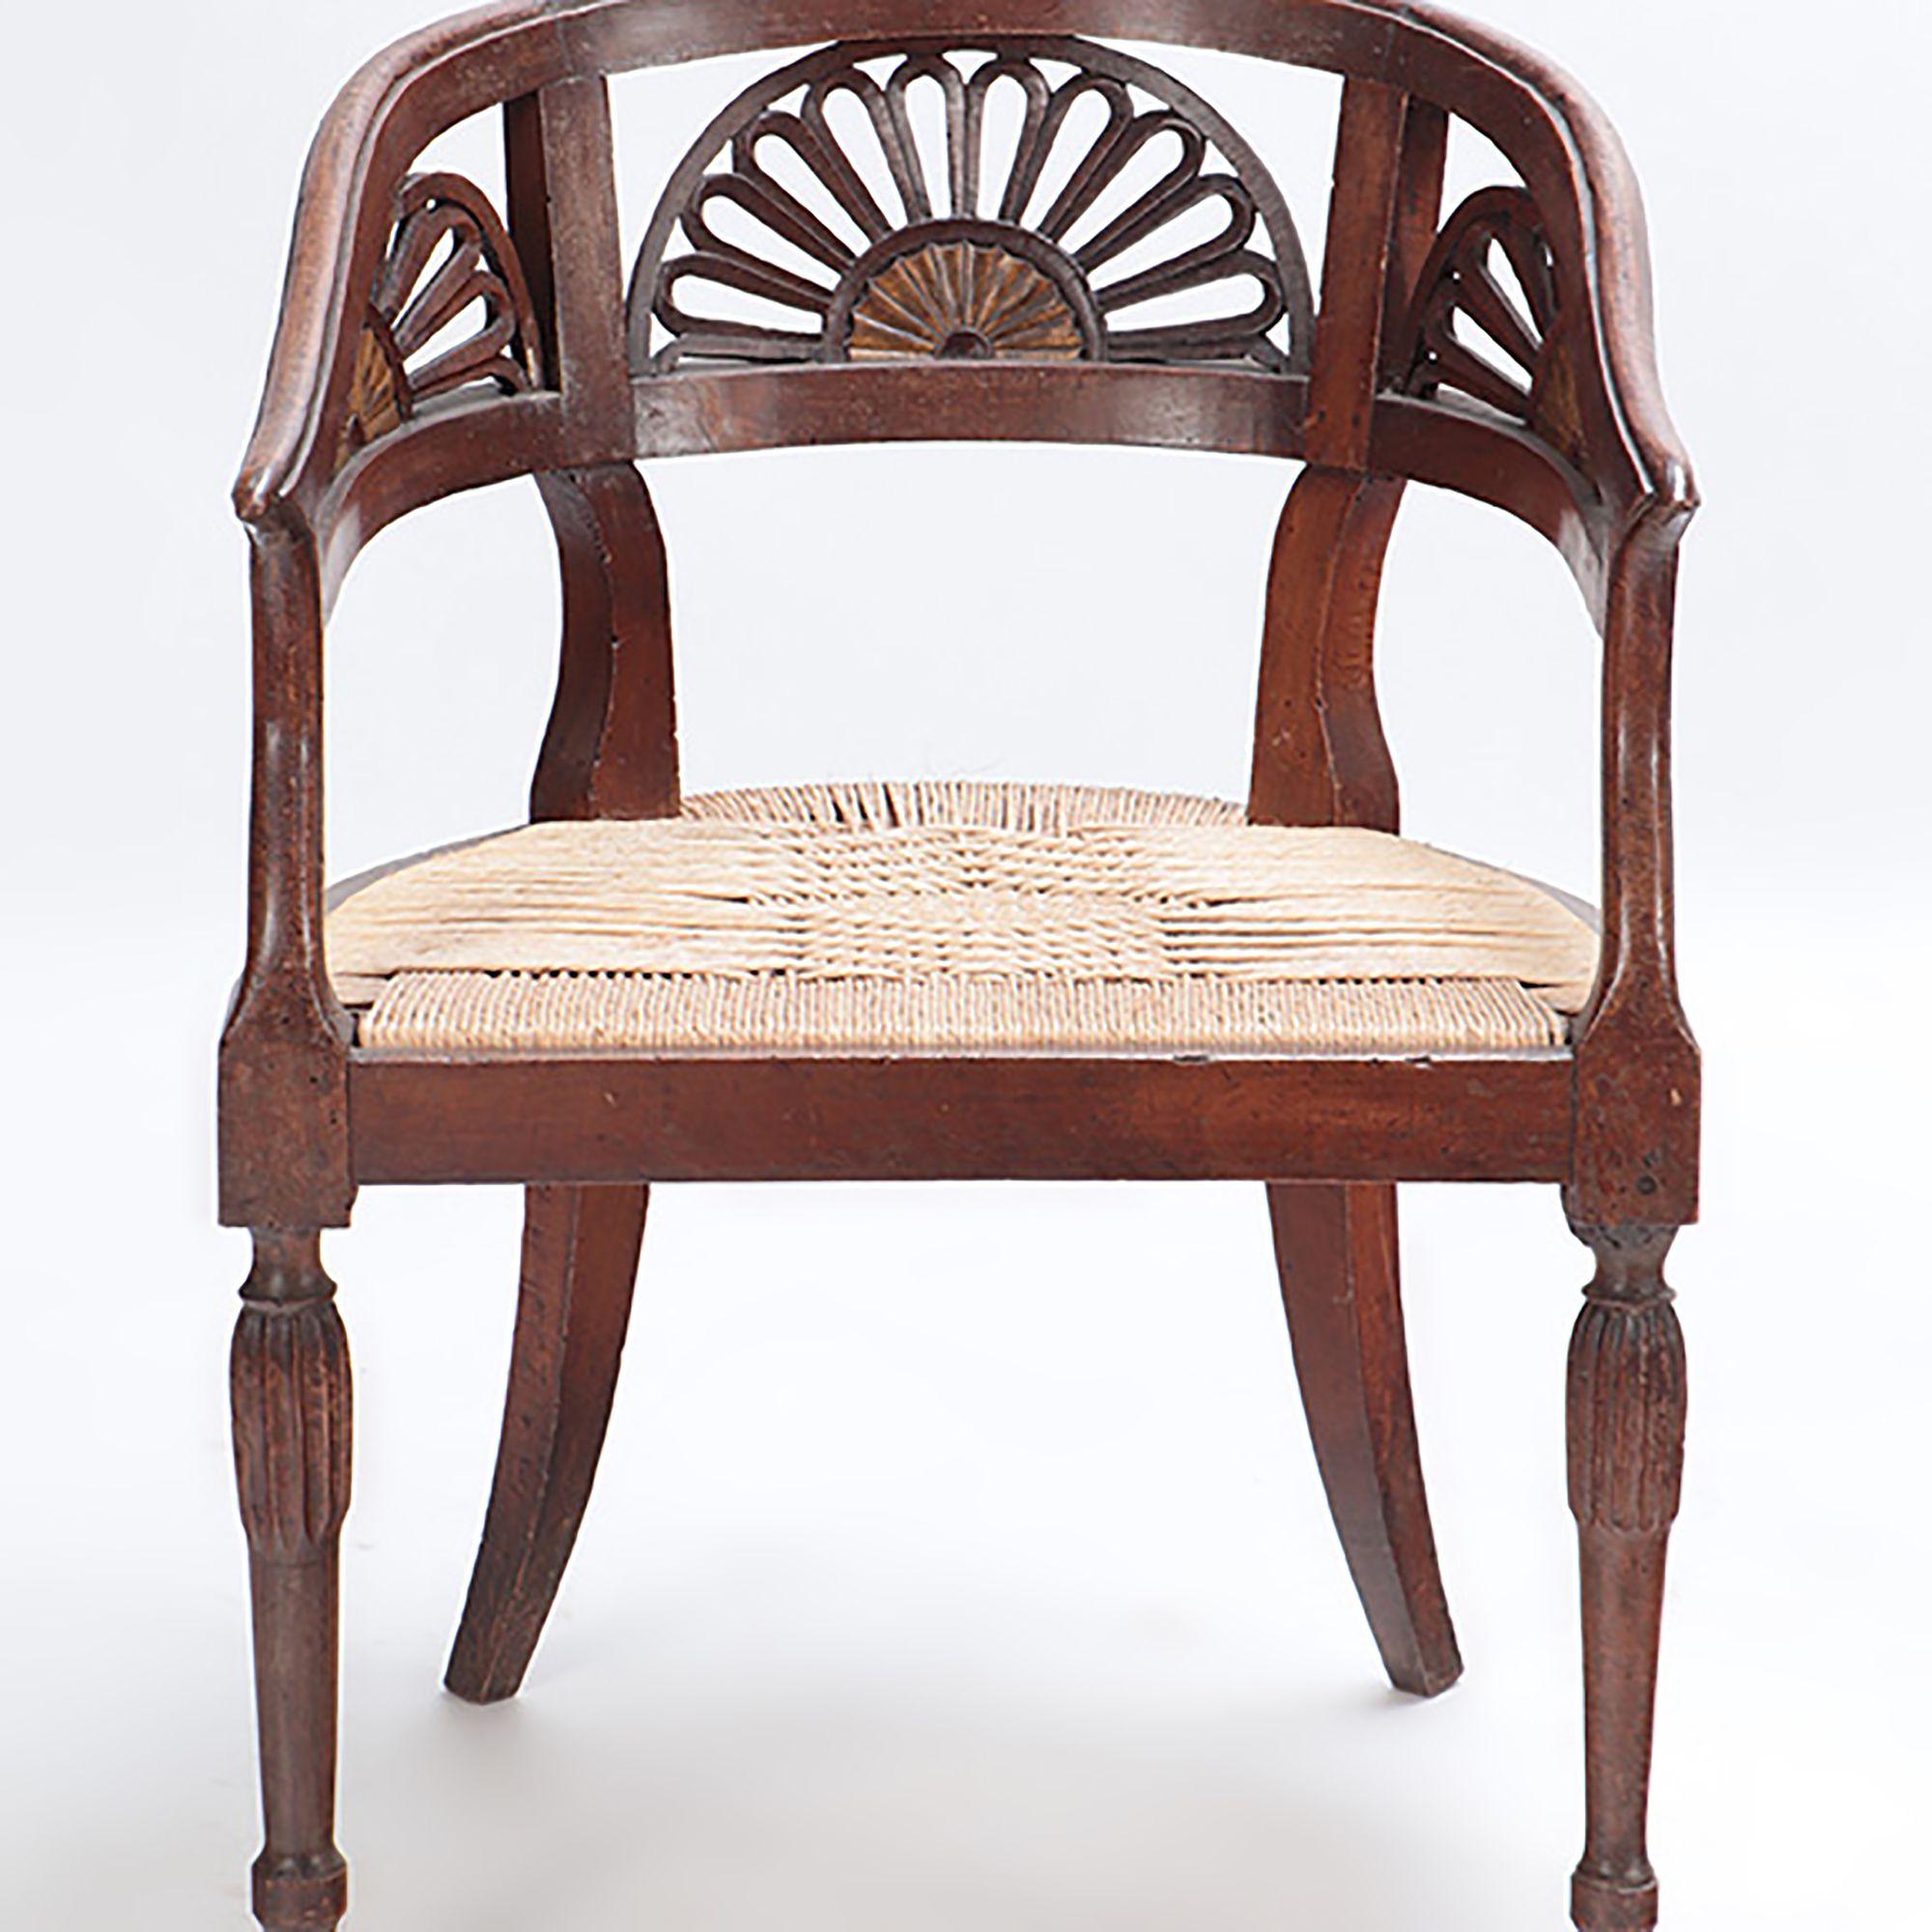 Pair of Italian Walnut Open Arm Chairs with Cord Seats, circa 1800 In Good Condition For Sale In Philadelphia, PA